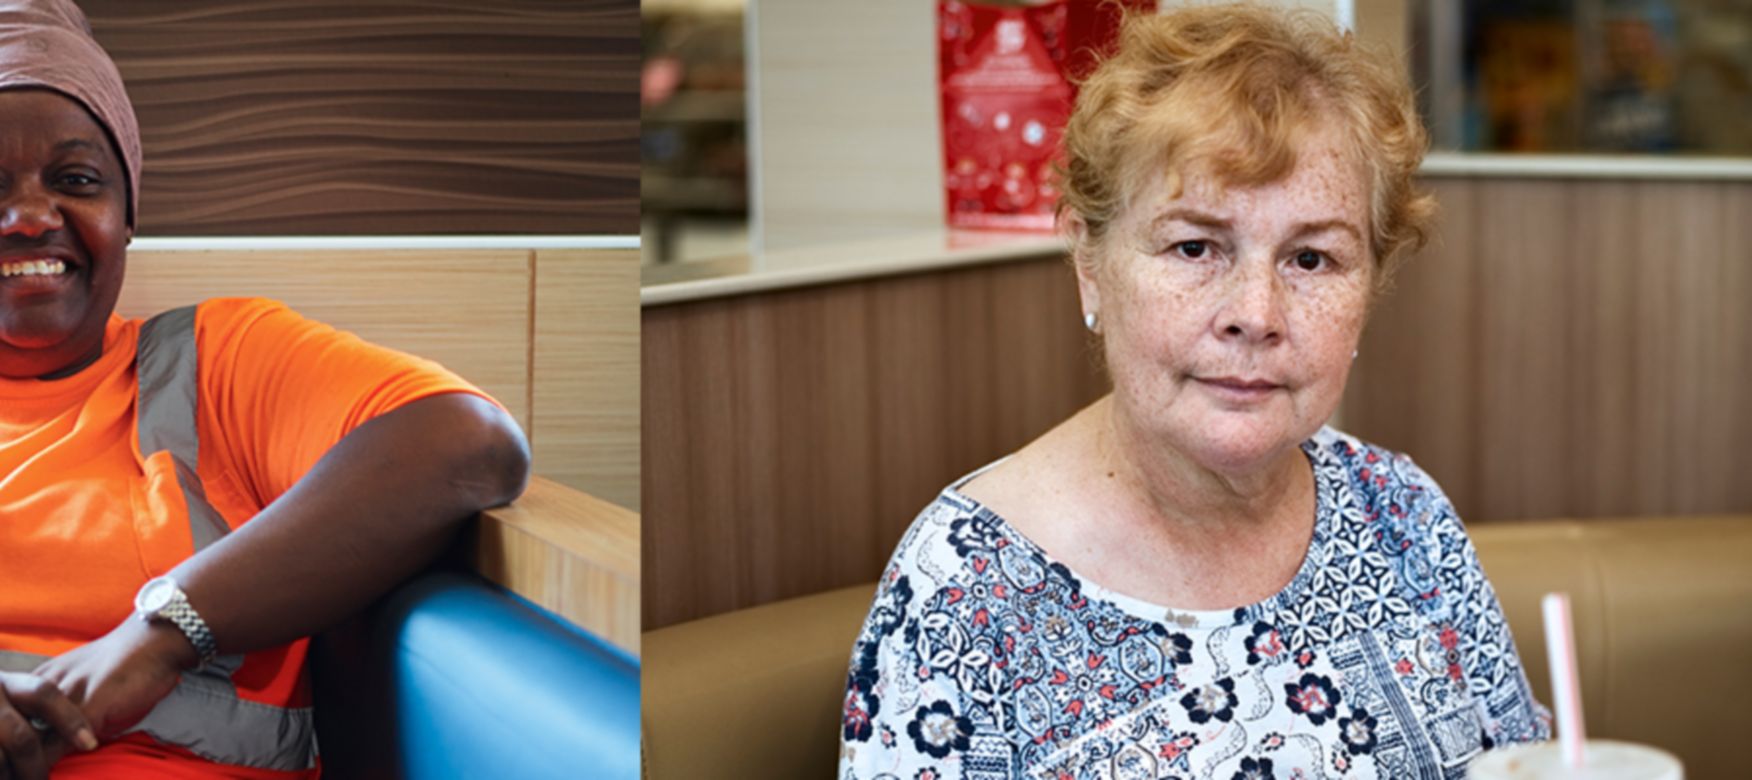 Smiling woman sitting at corner of McDonald's booth and a red-haired grandmother sitting at McDonald's